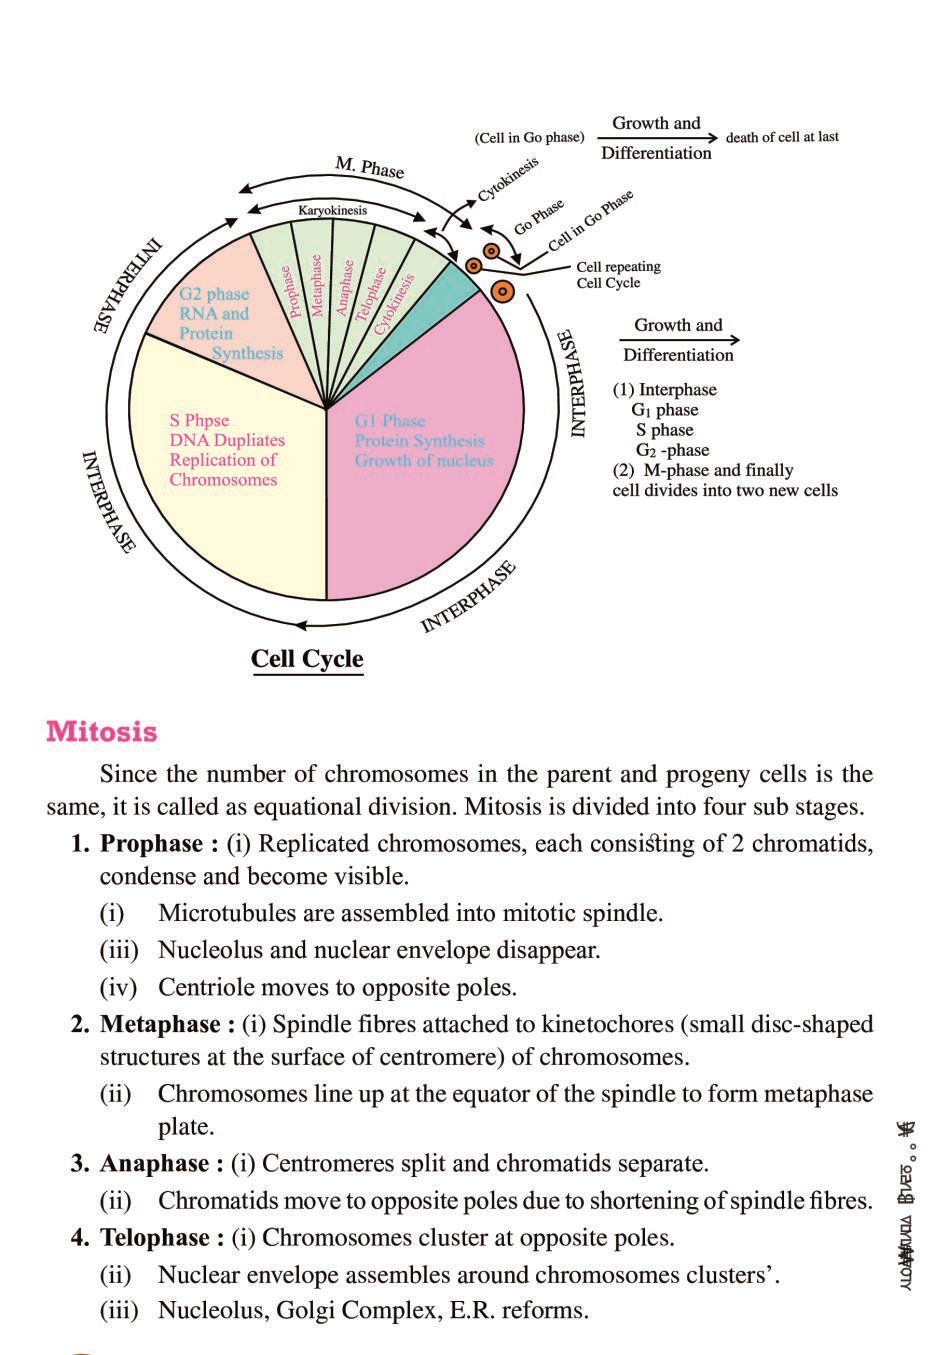 case study questions on cell class 11 biology